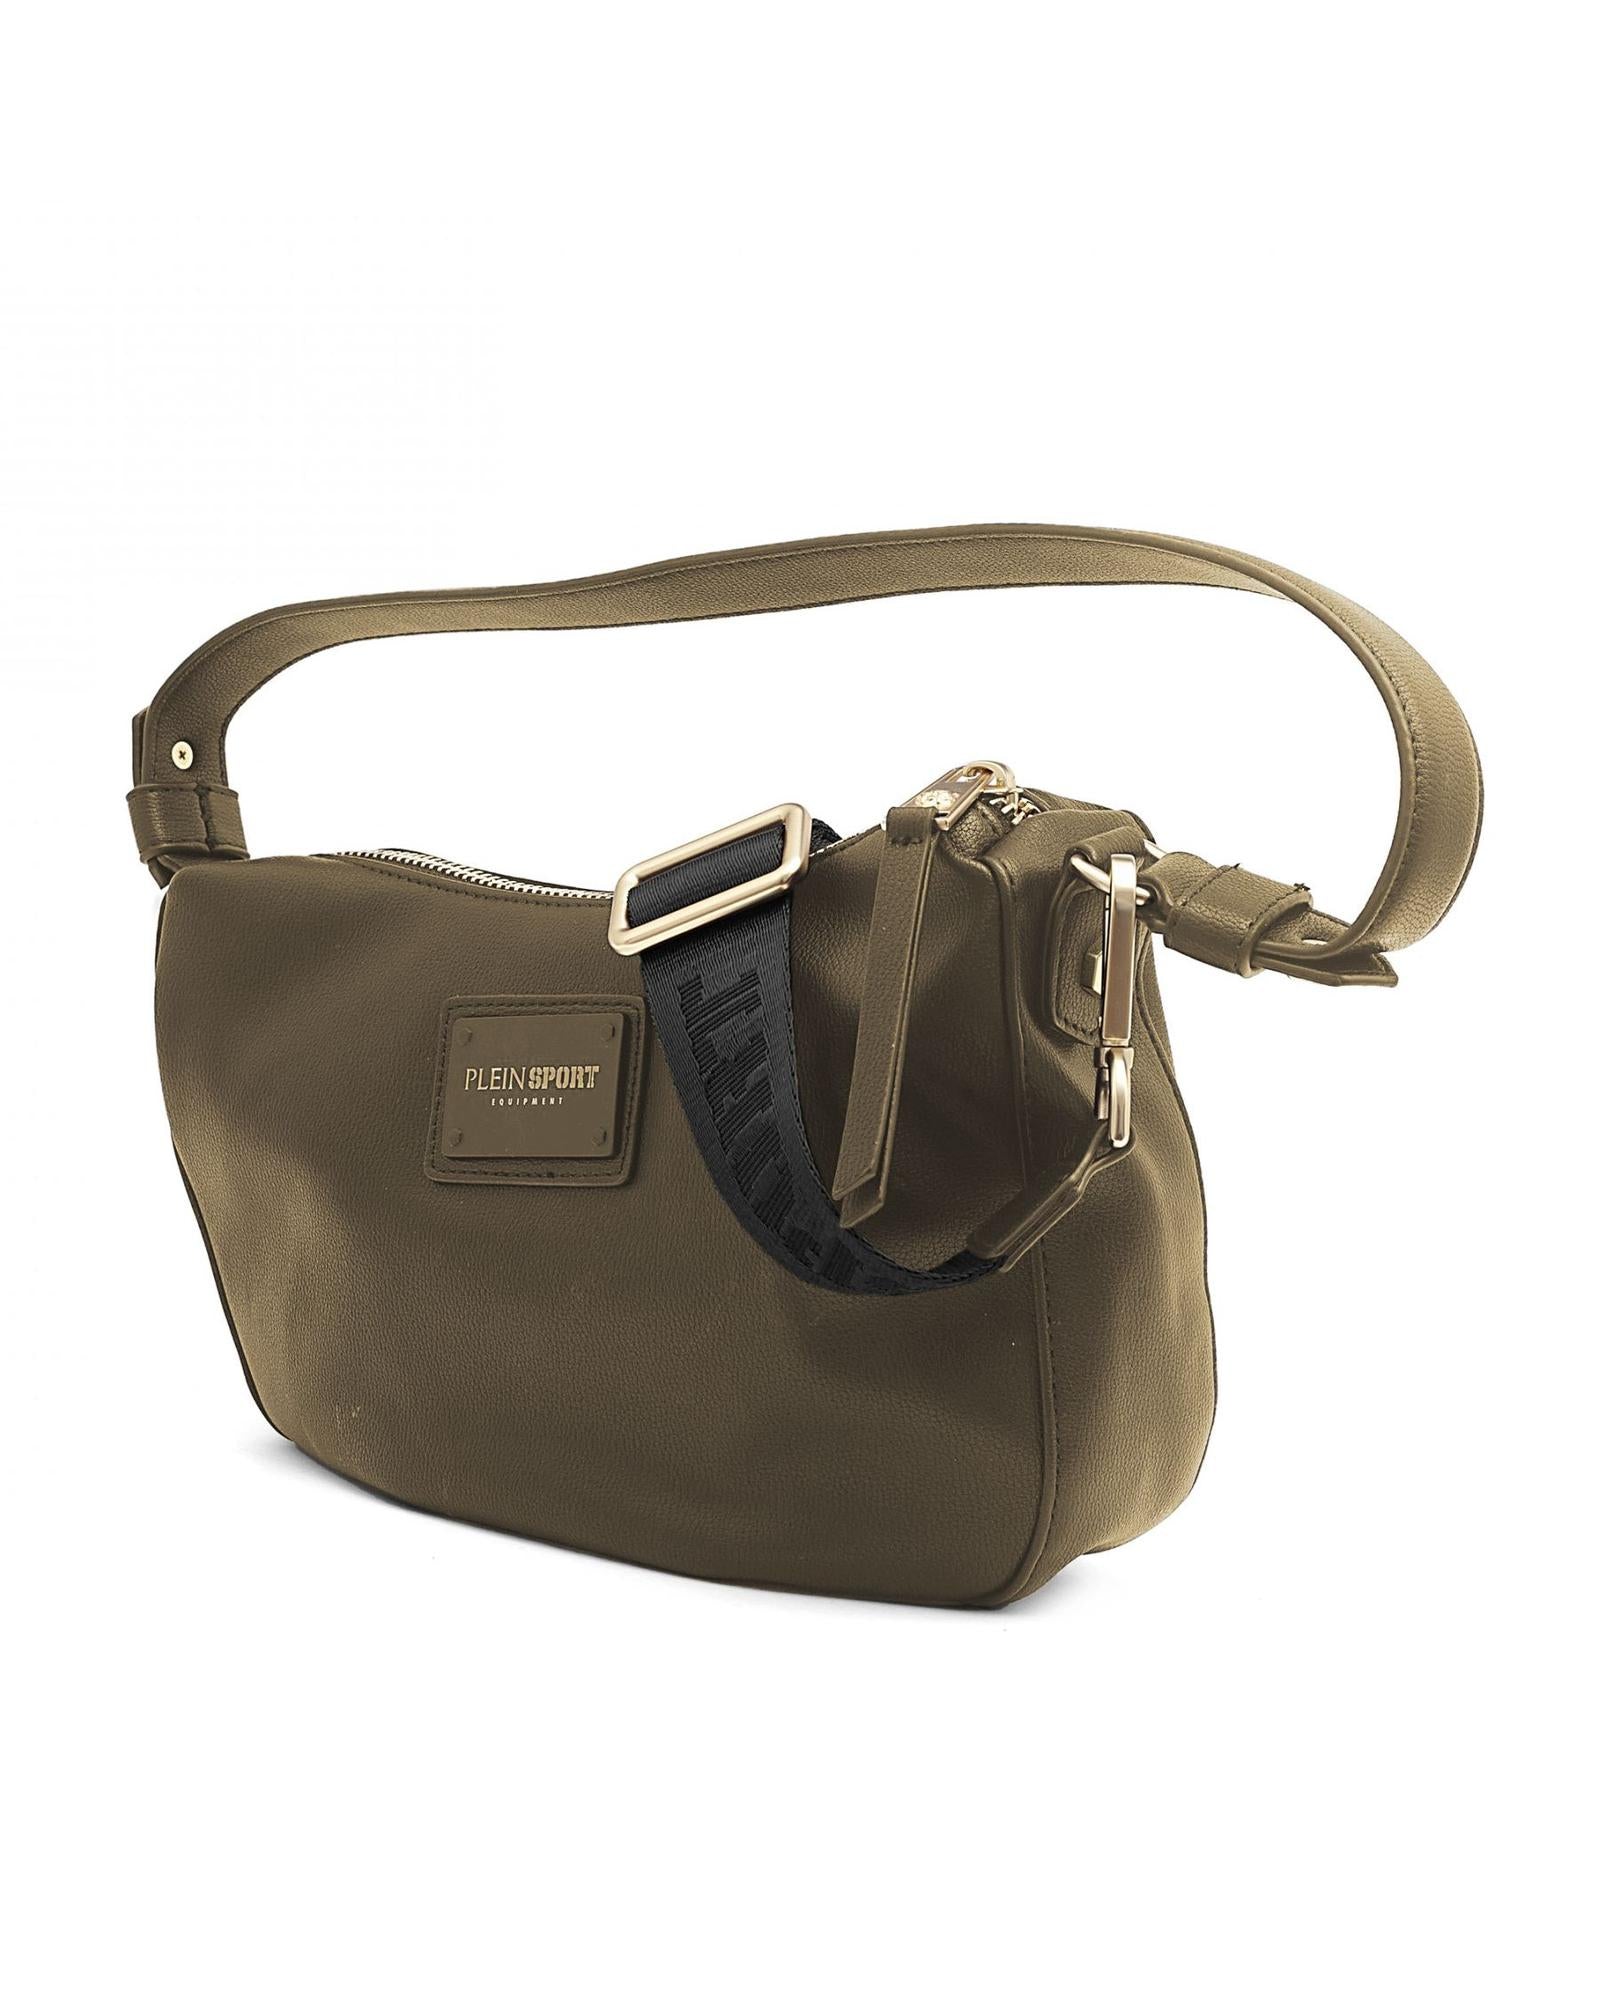 Army Green Shoulder Bag with Zip Closure and Internal Pockets One Size Women